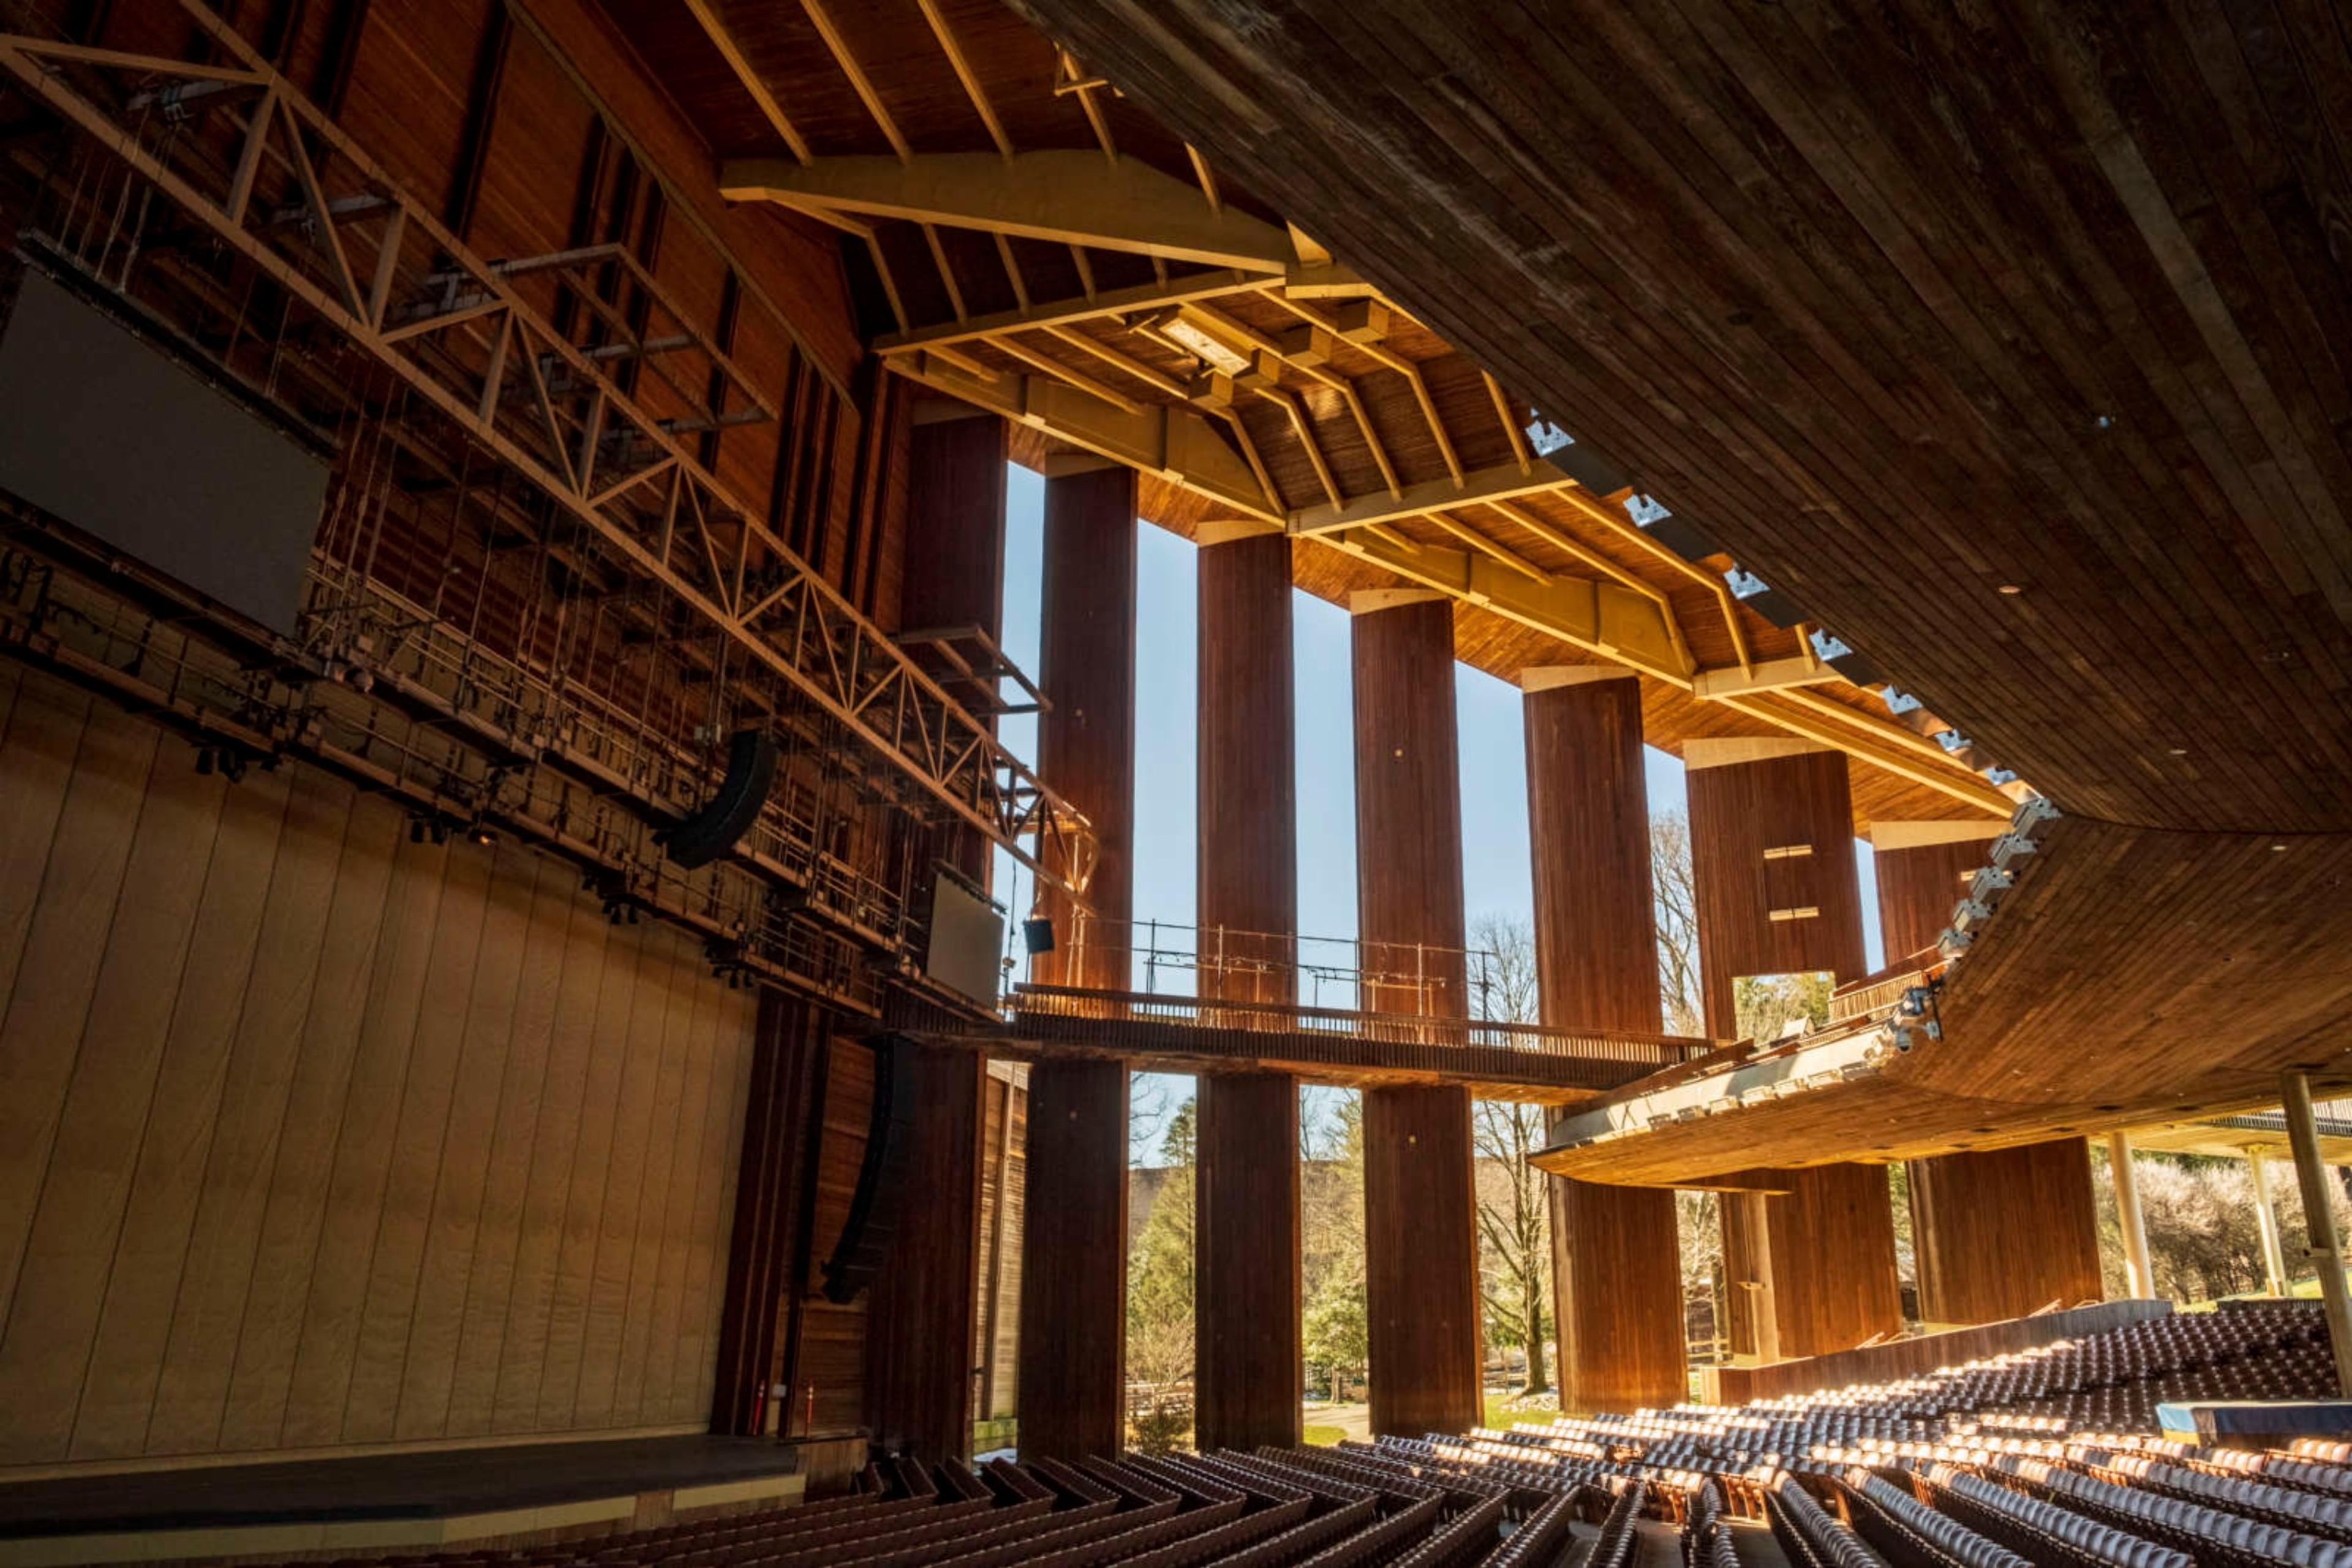 Wolf Trap Foundation for the Performing Arts